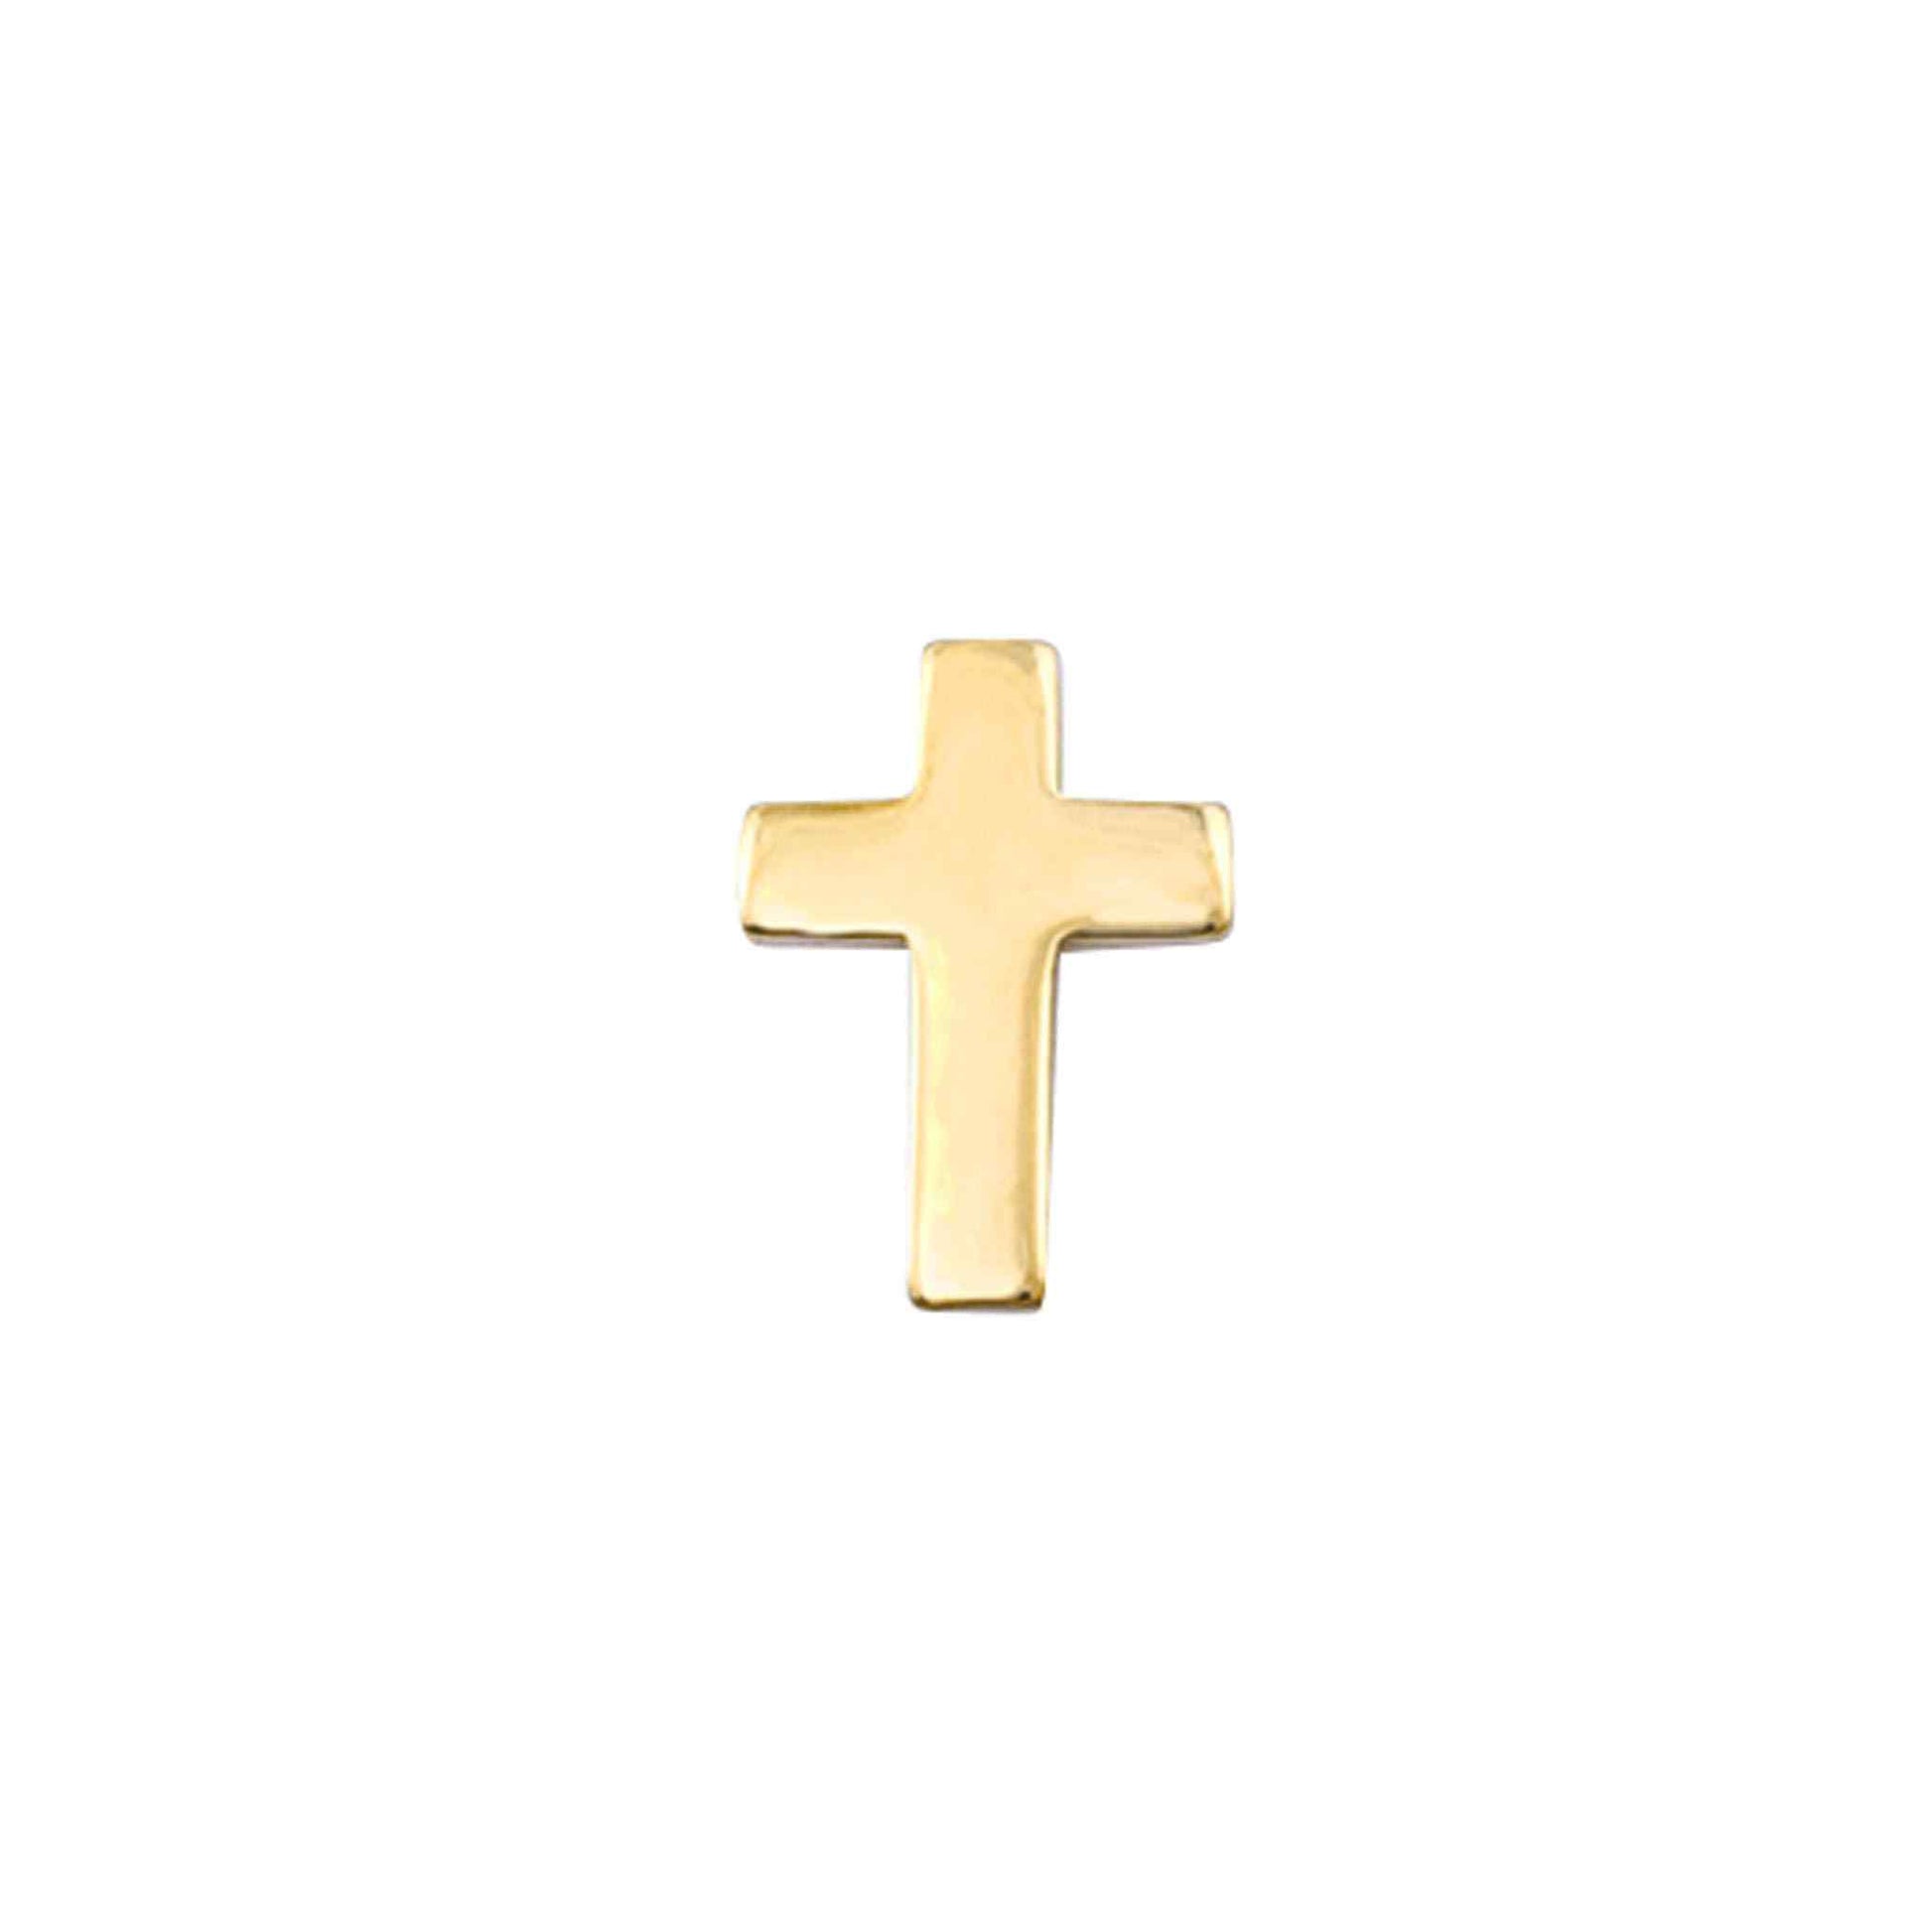 A gold 14k yellow gold cross tie tack displayed on a neutral white background.